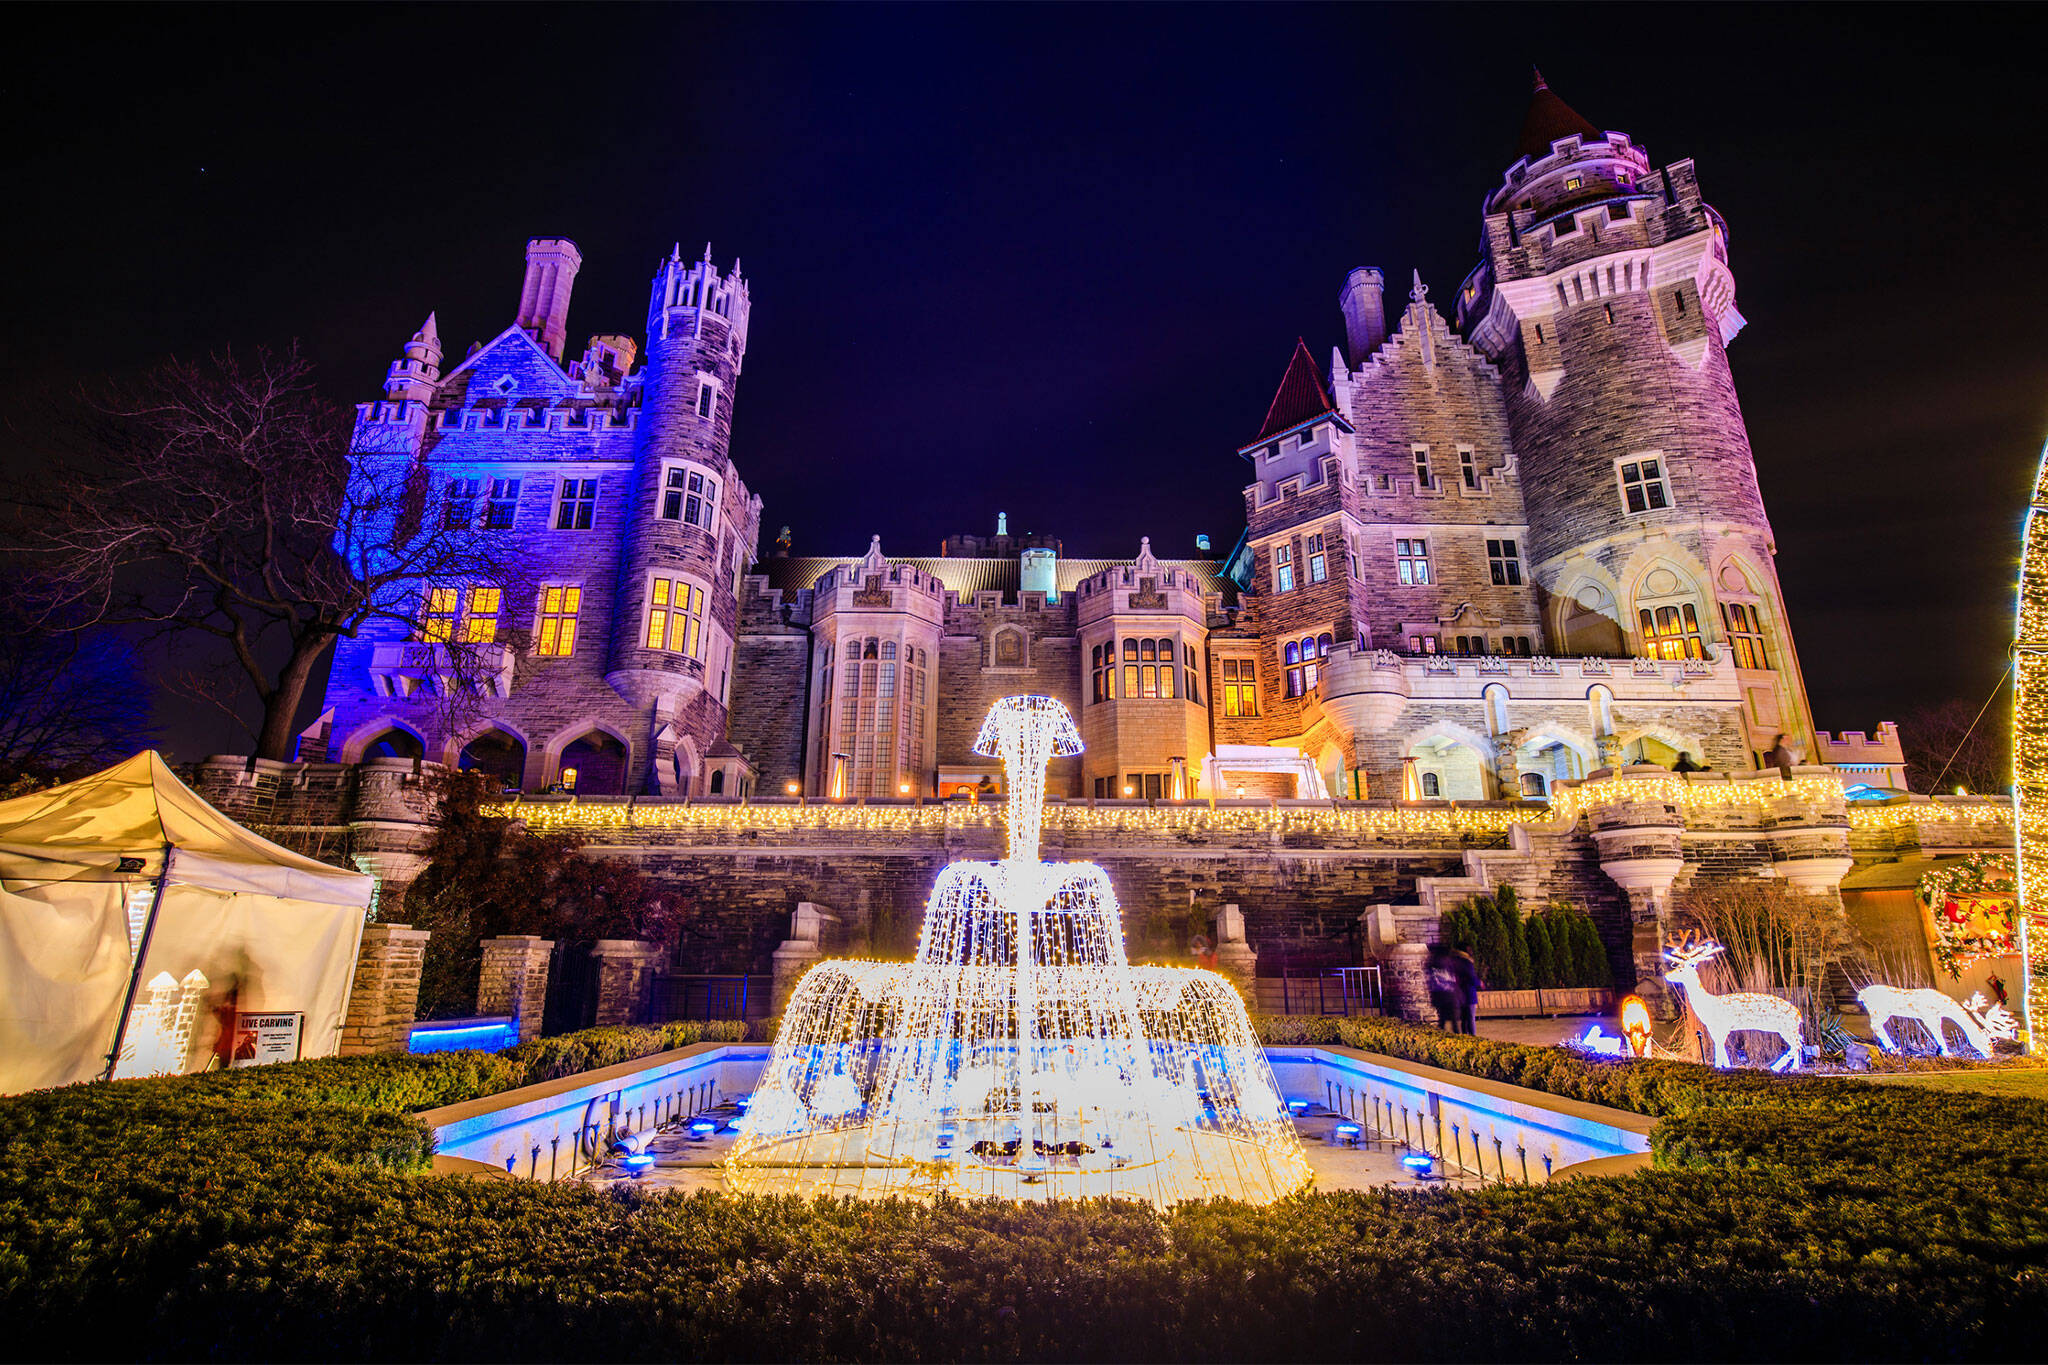 Casa Loma is transforming into a winter wonderland with a holiday